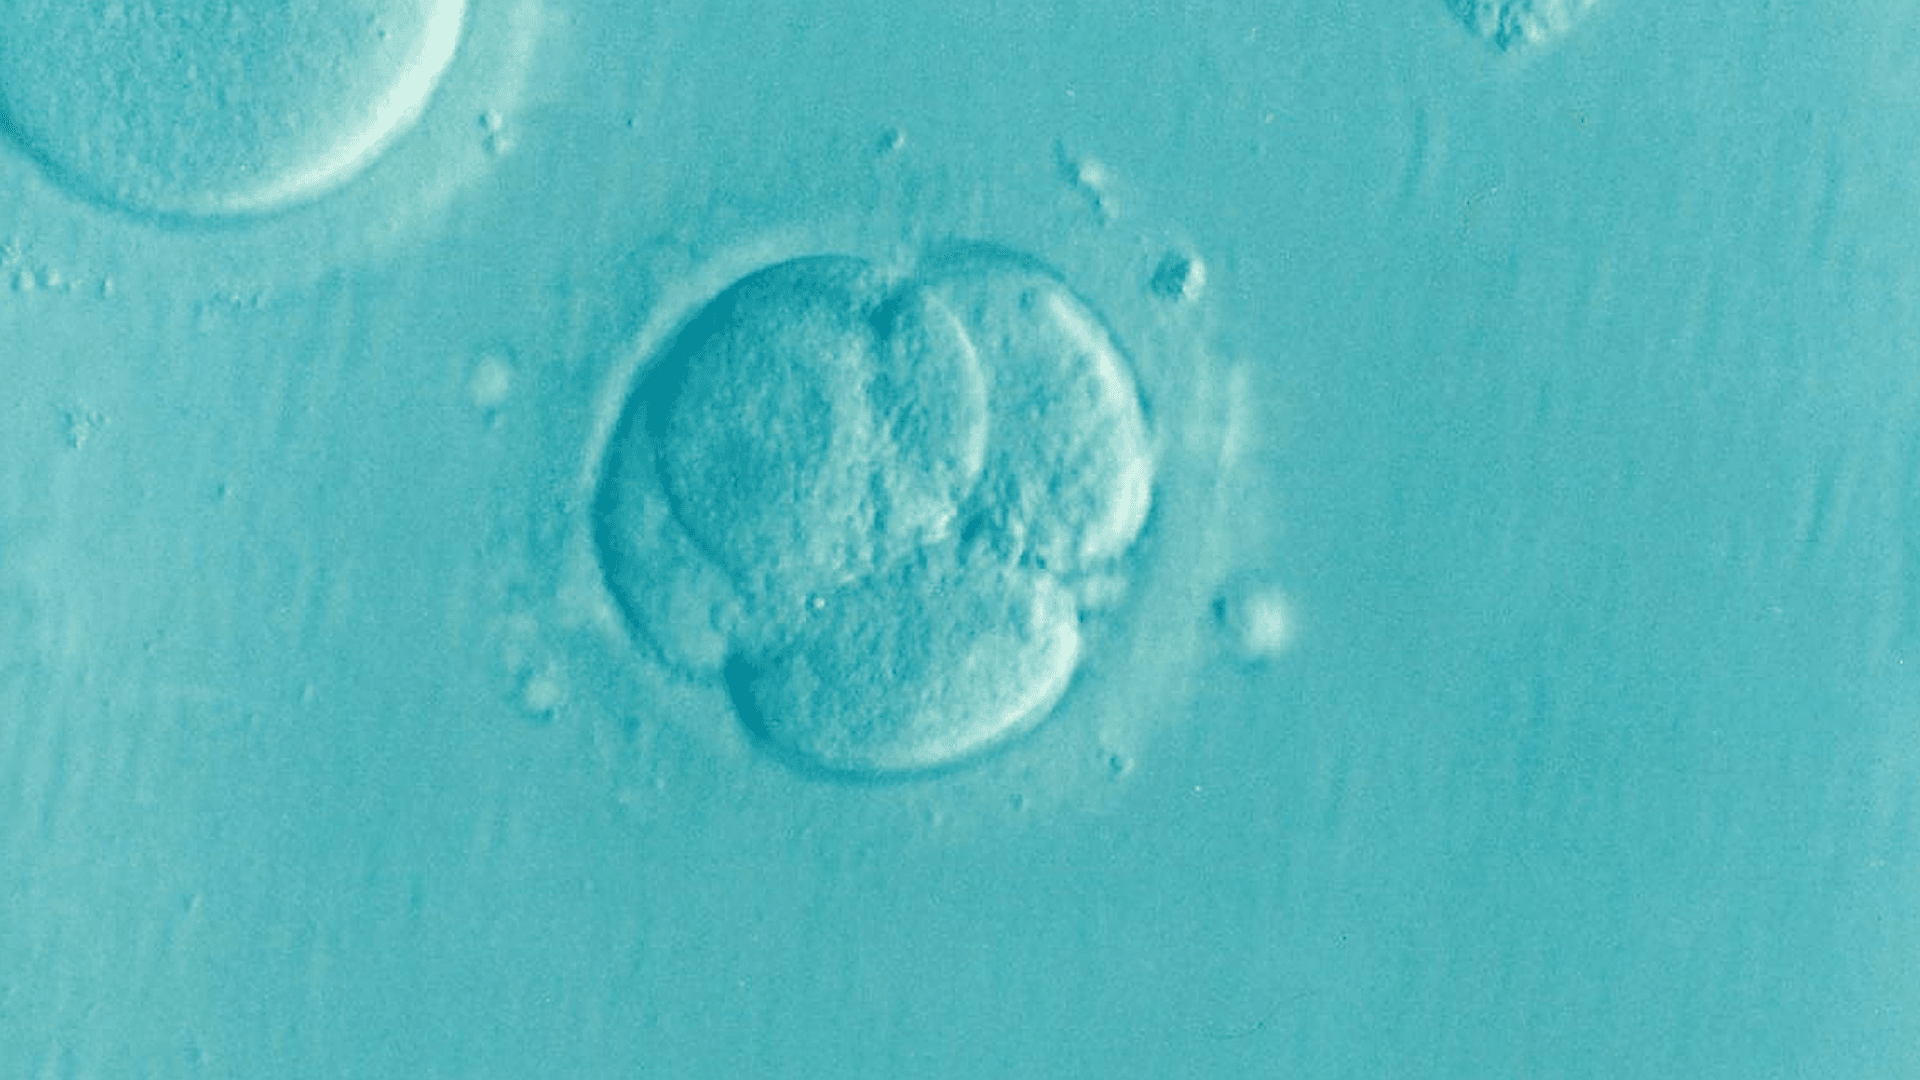 New stem cell research guidelines a ‘shifting goalpost’ for embryo safeguards. ethicist says